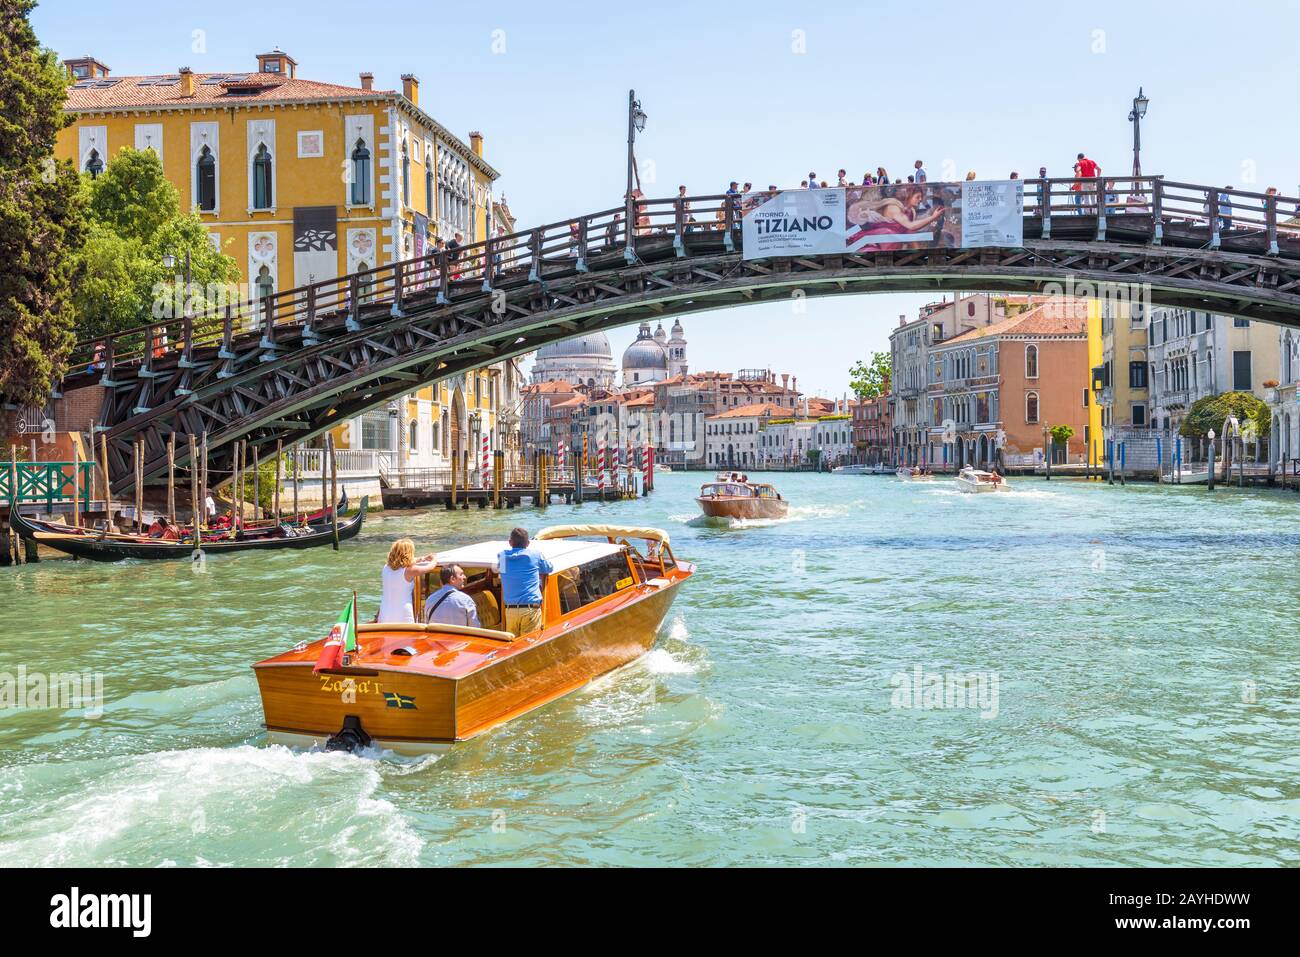 Venice, Italy - May 18, 2017: Water taxi with tourists sails on Grand Canal in Venice. Motor boats are the main transport in Venice. Romantic trip acr Stock Photo